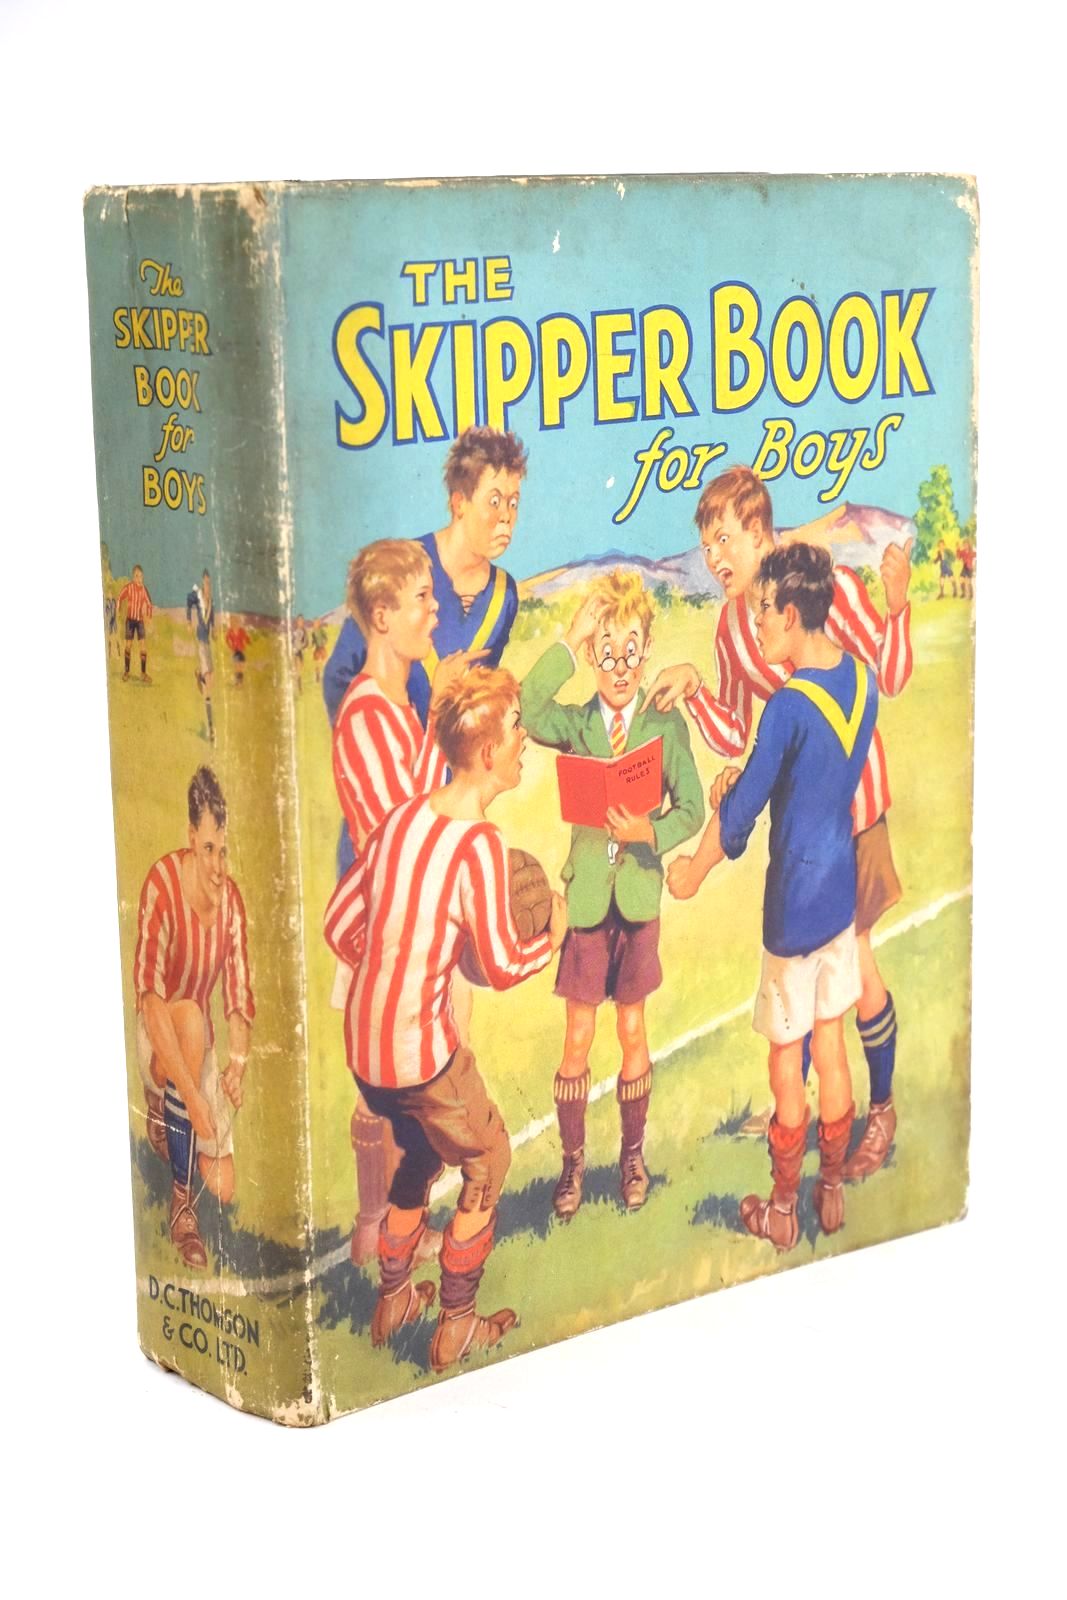 Photo of THE SKIPPER BOOK FOR BOYS 1935 written by Kaye, Crawford
et al, illustrated by Various, published by D.C. Thomson & Co Ltd. (STOCK CODE: 1324790)  for sale by Stella & Rose's Books